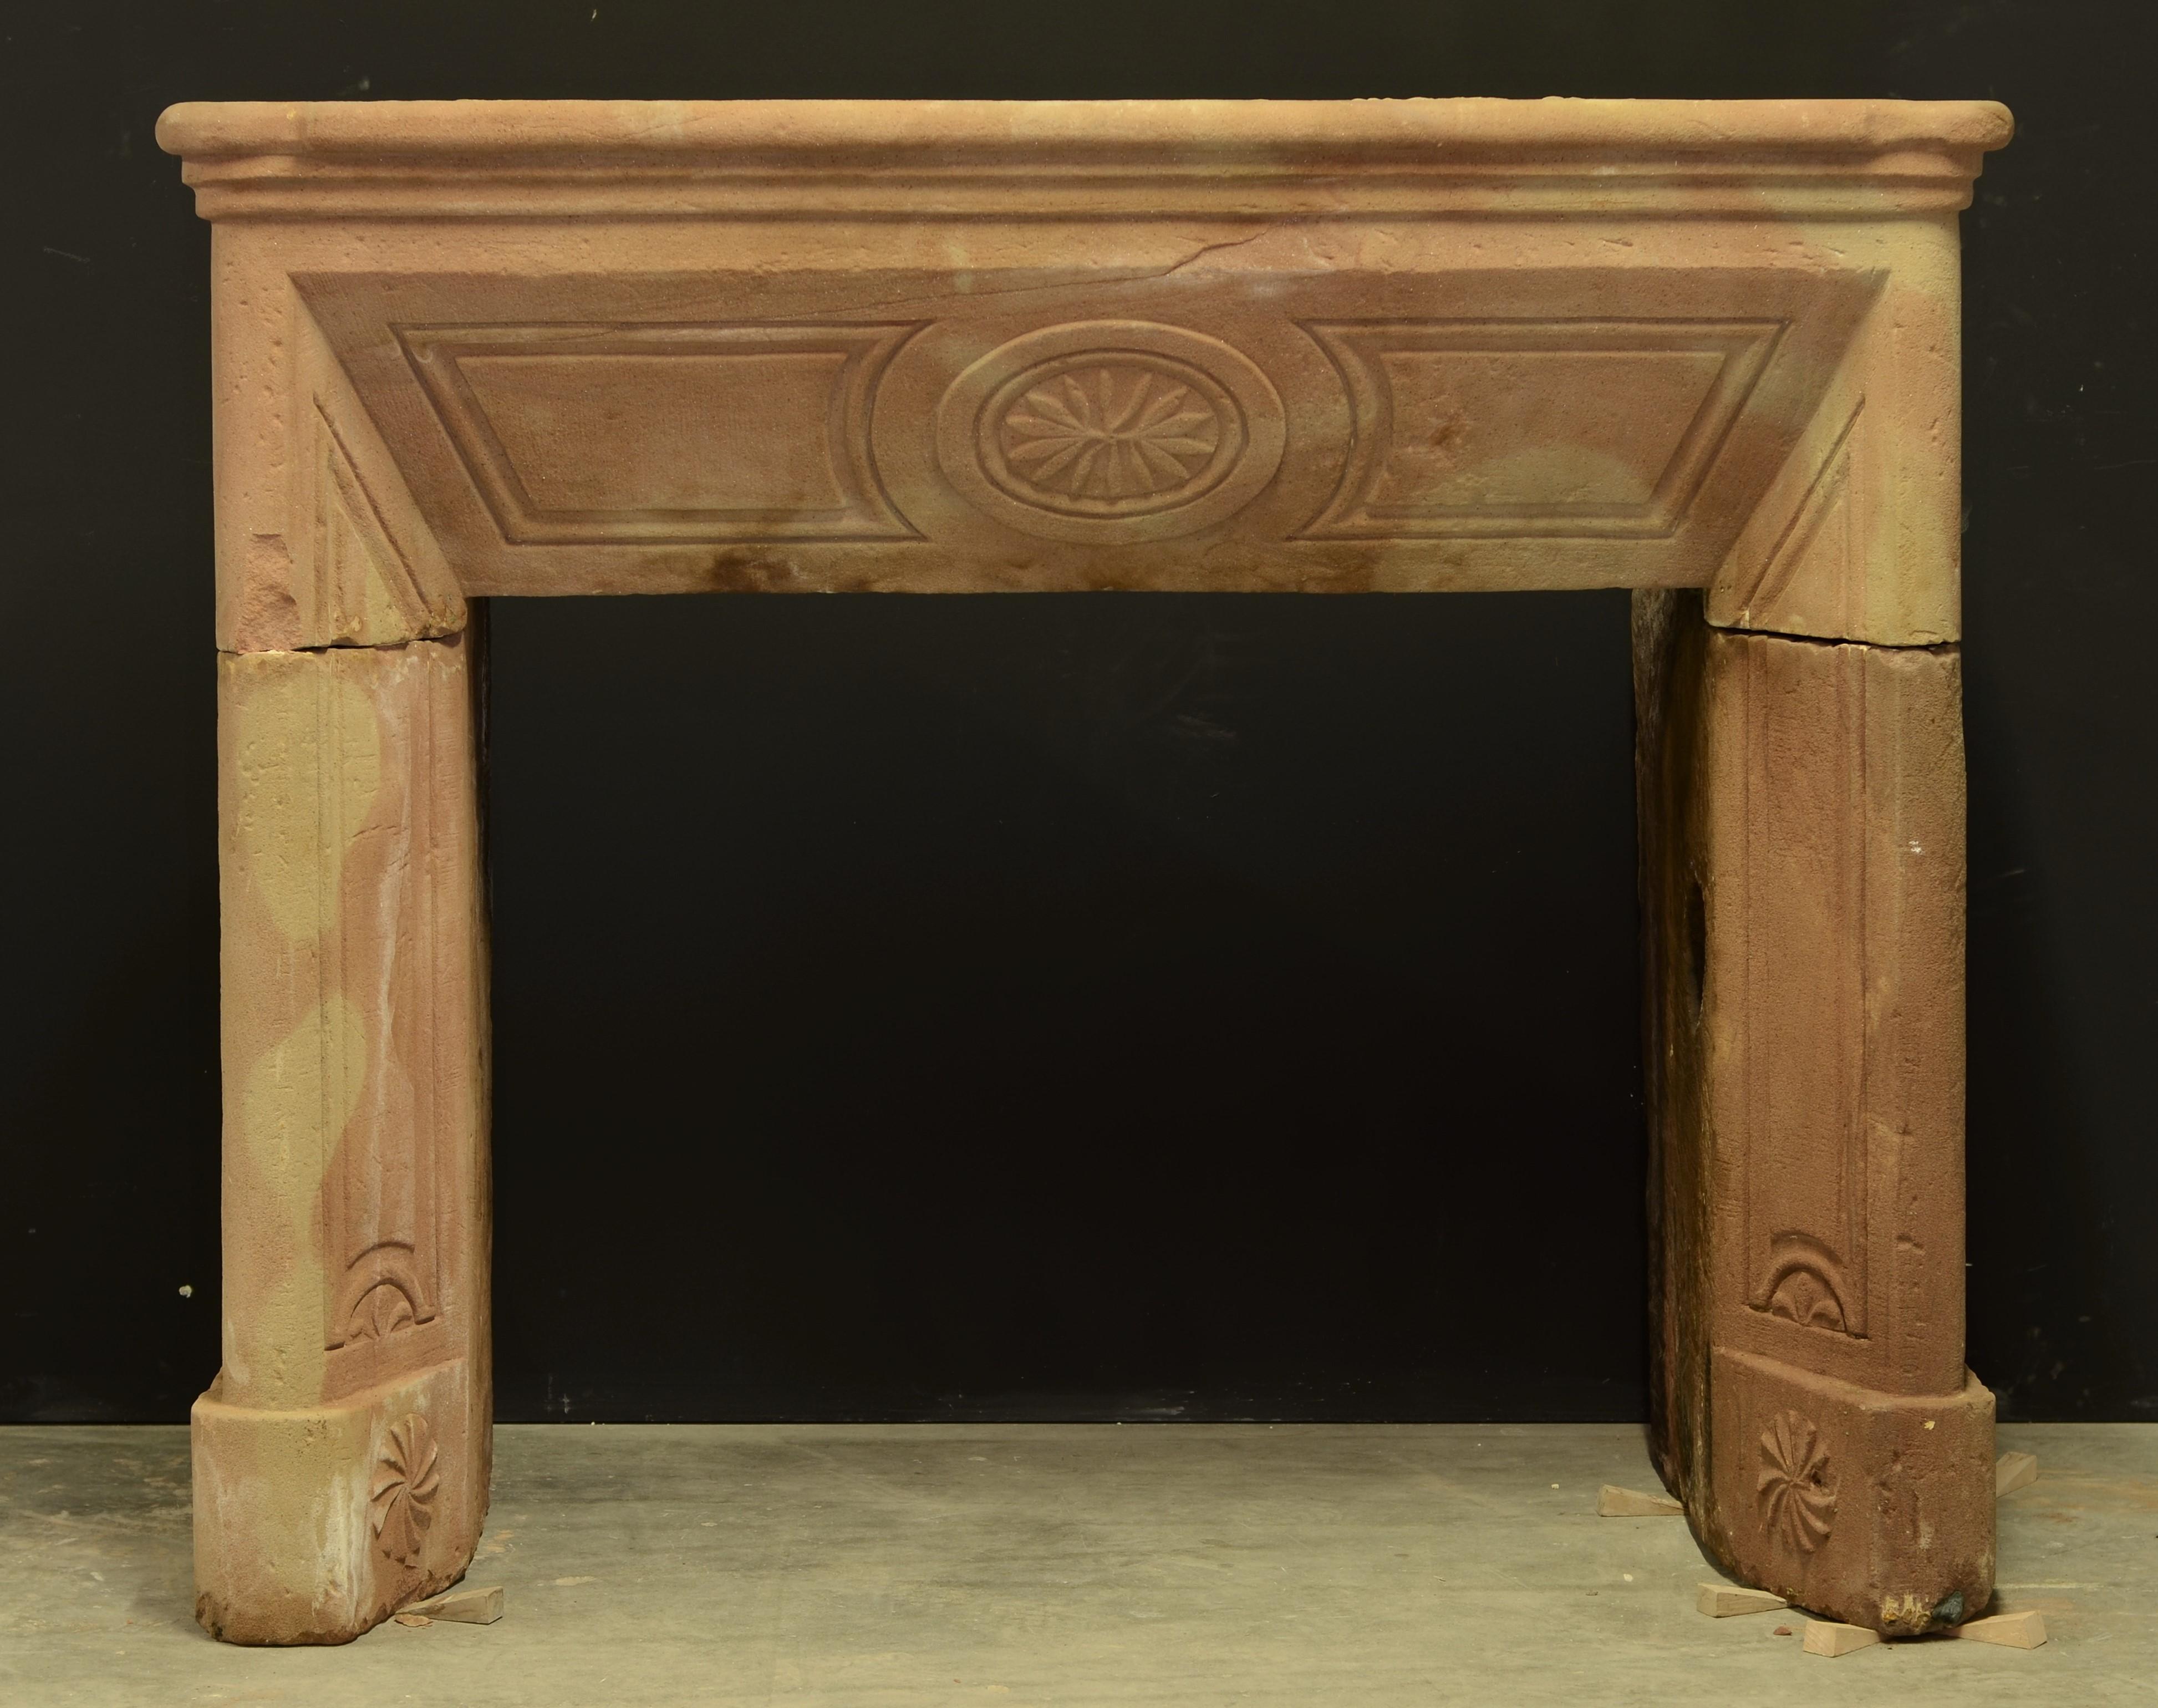 Very nice and subtle pinkish French Louis XVI fireplace mantel.
The mantel is made from Sandstone from the “Massif de Vosges” called Grès Rose, pink sandstone.
One of its unique characters it that the color changes during the day and the way it is